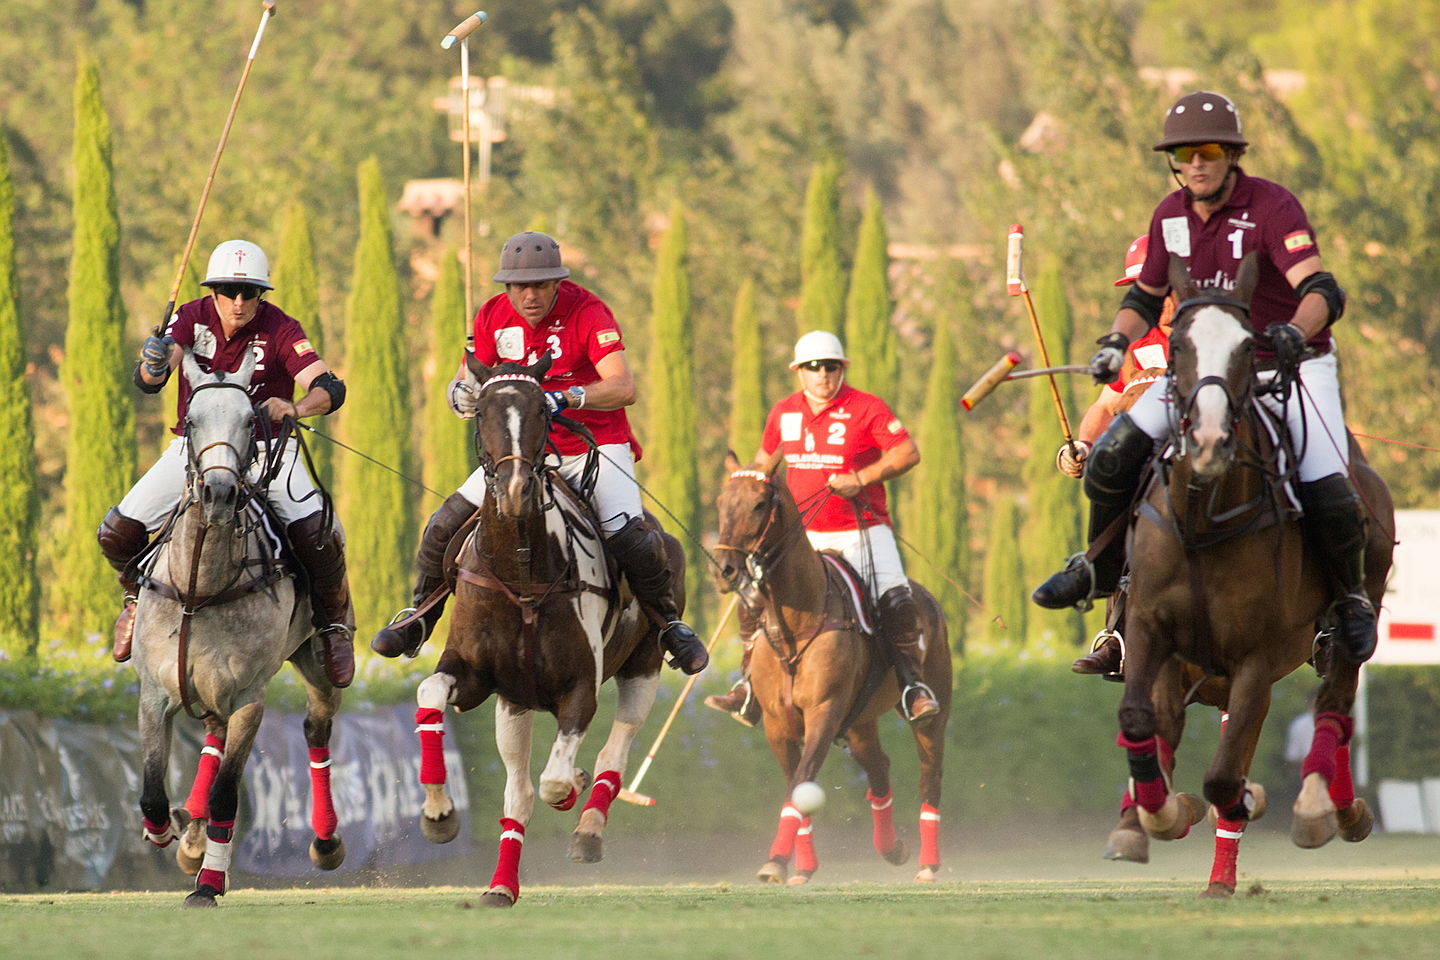  Gent
- polo-cup-action.jpg